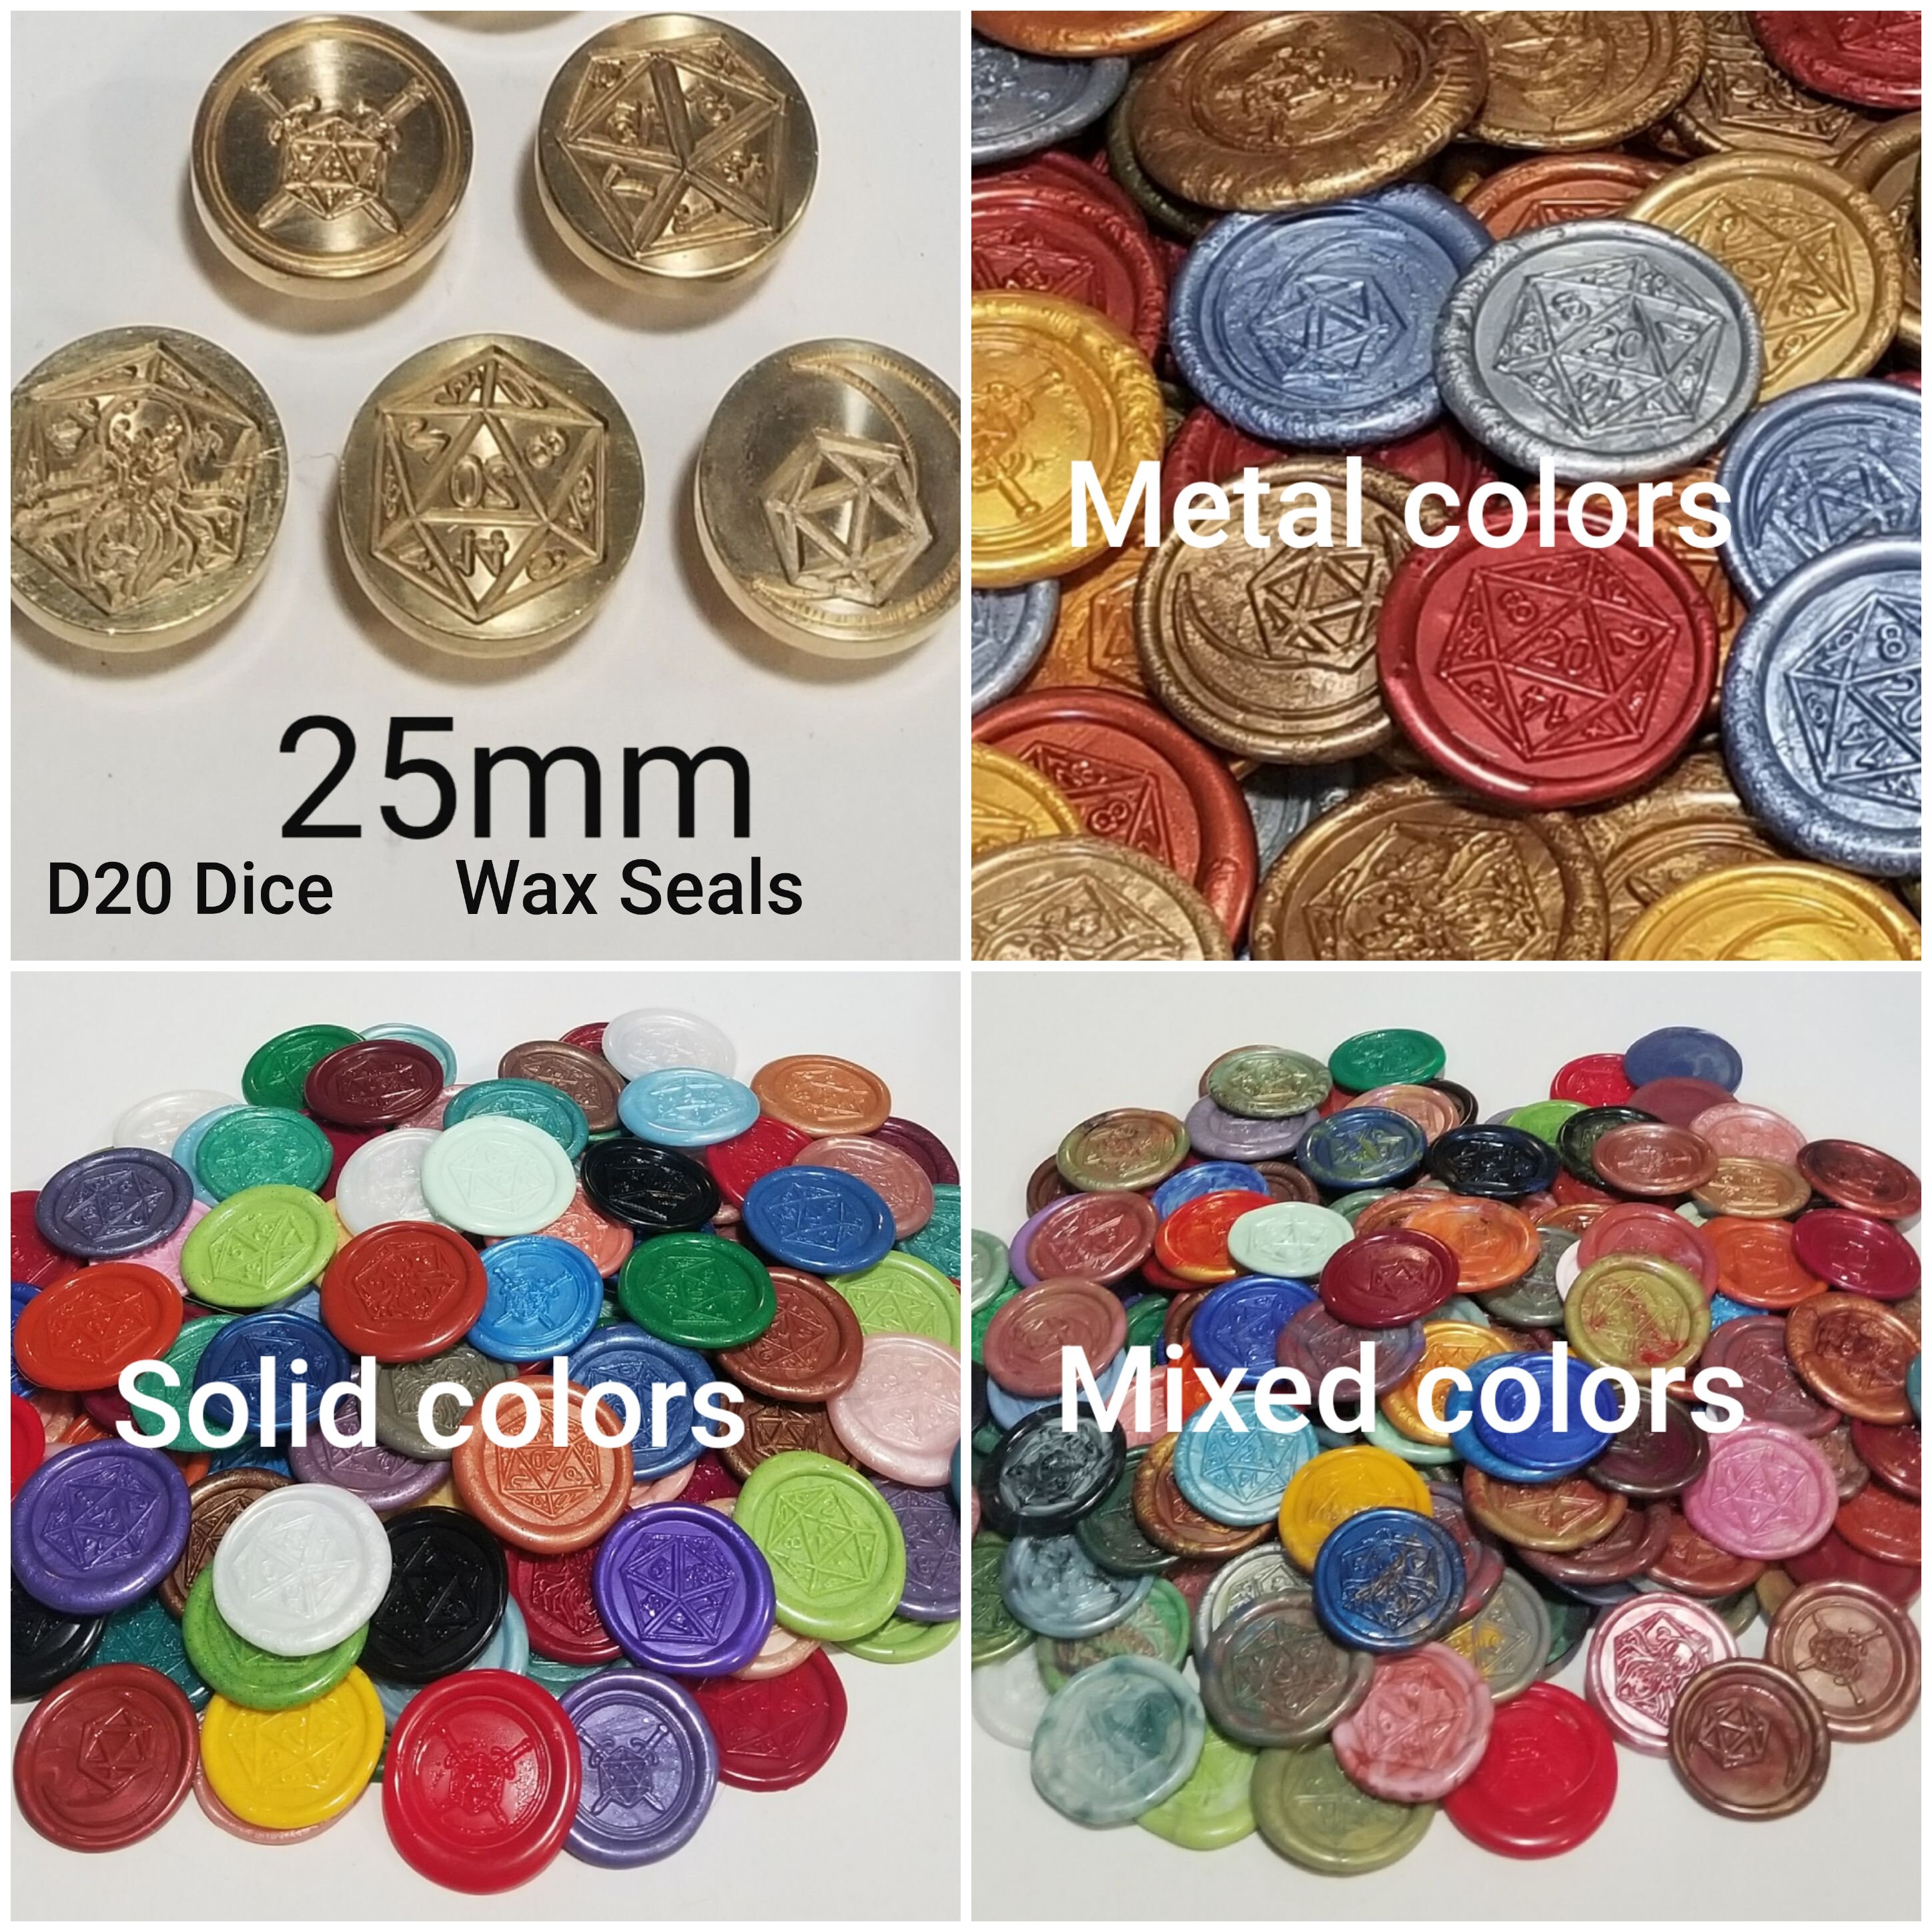 DND Wax Seal Stamp, Ideal Gift for Dungeons and Dragons/D&D Envelope  Scroll. Fantasy Wax Seal Kit with Dragon/D20 Dice/Magic Potion/Caduceus,  Great